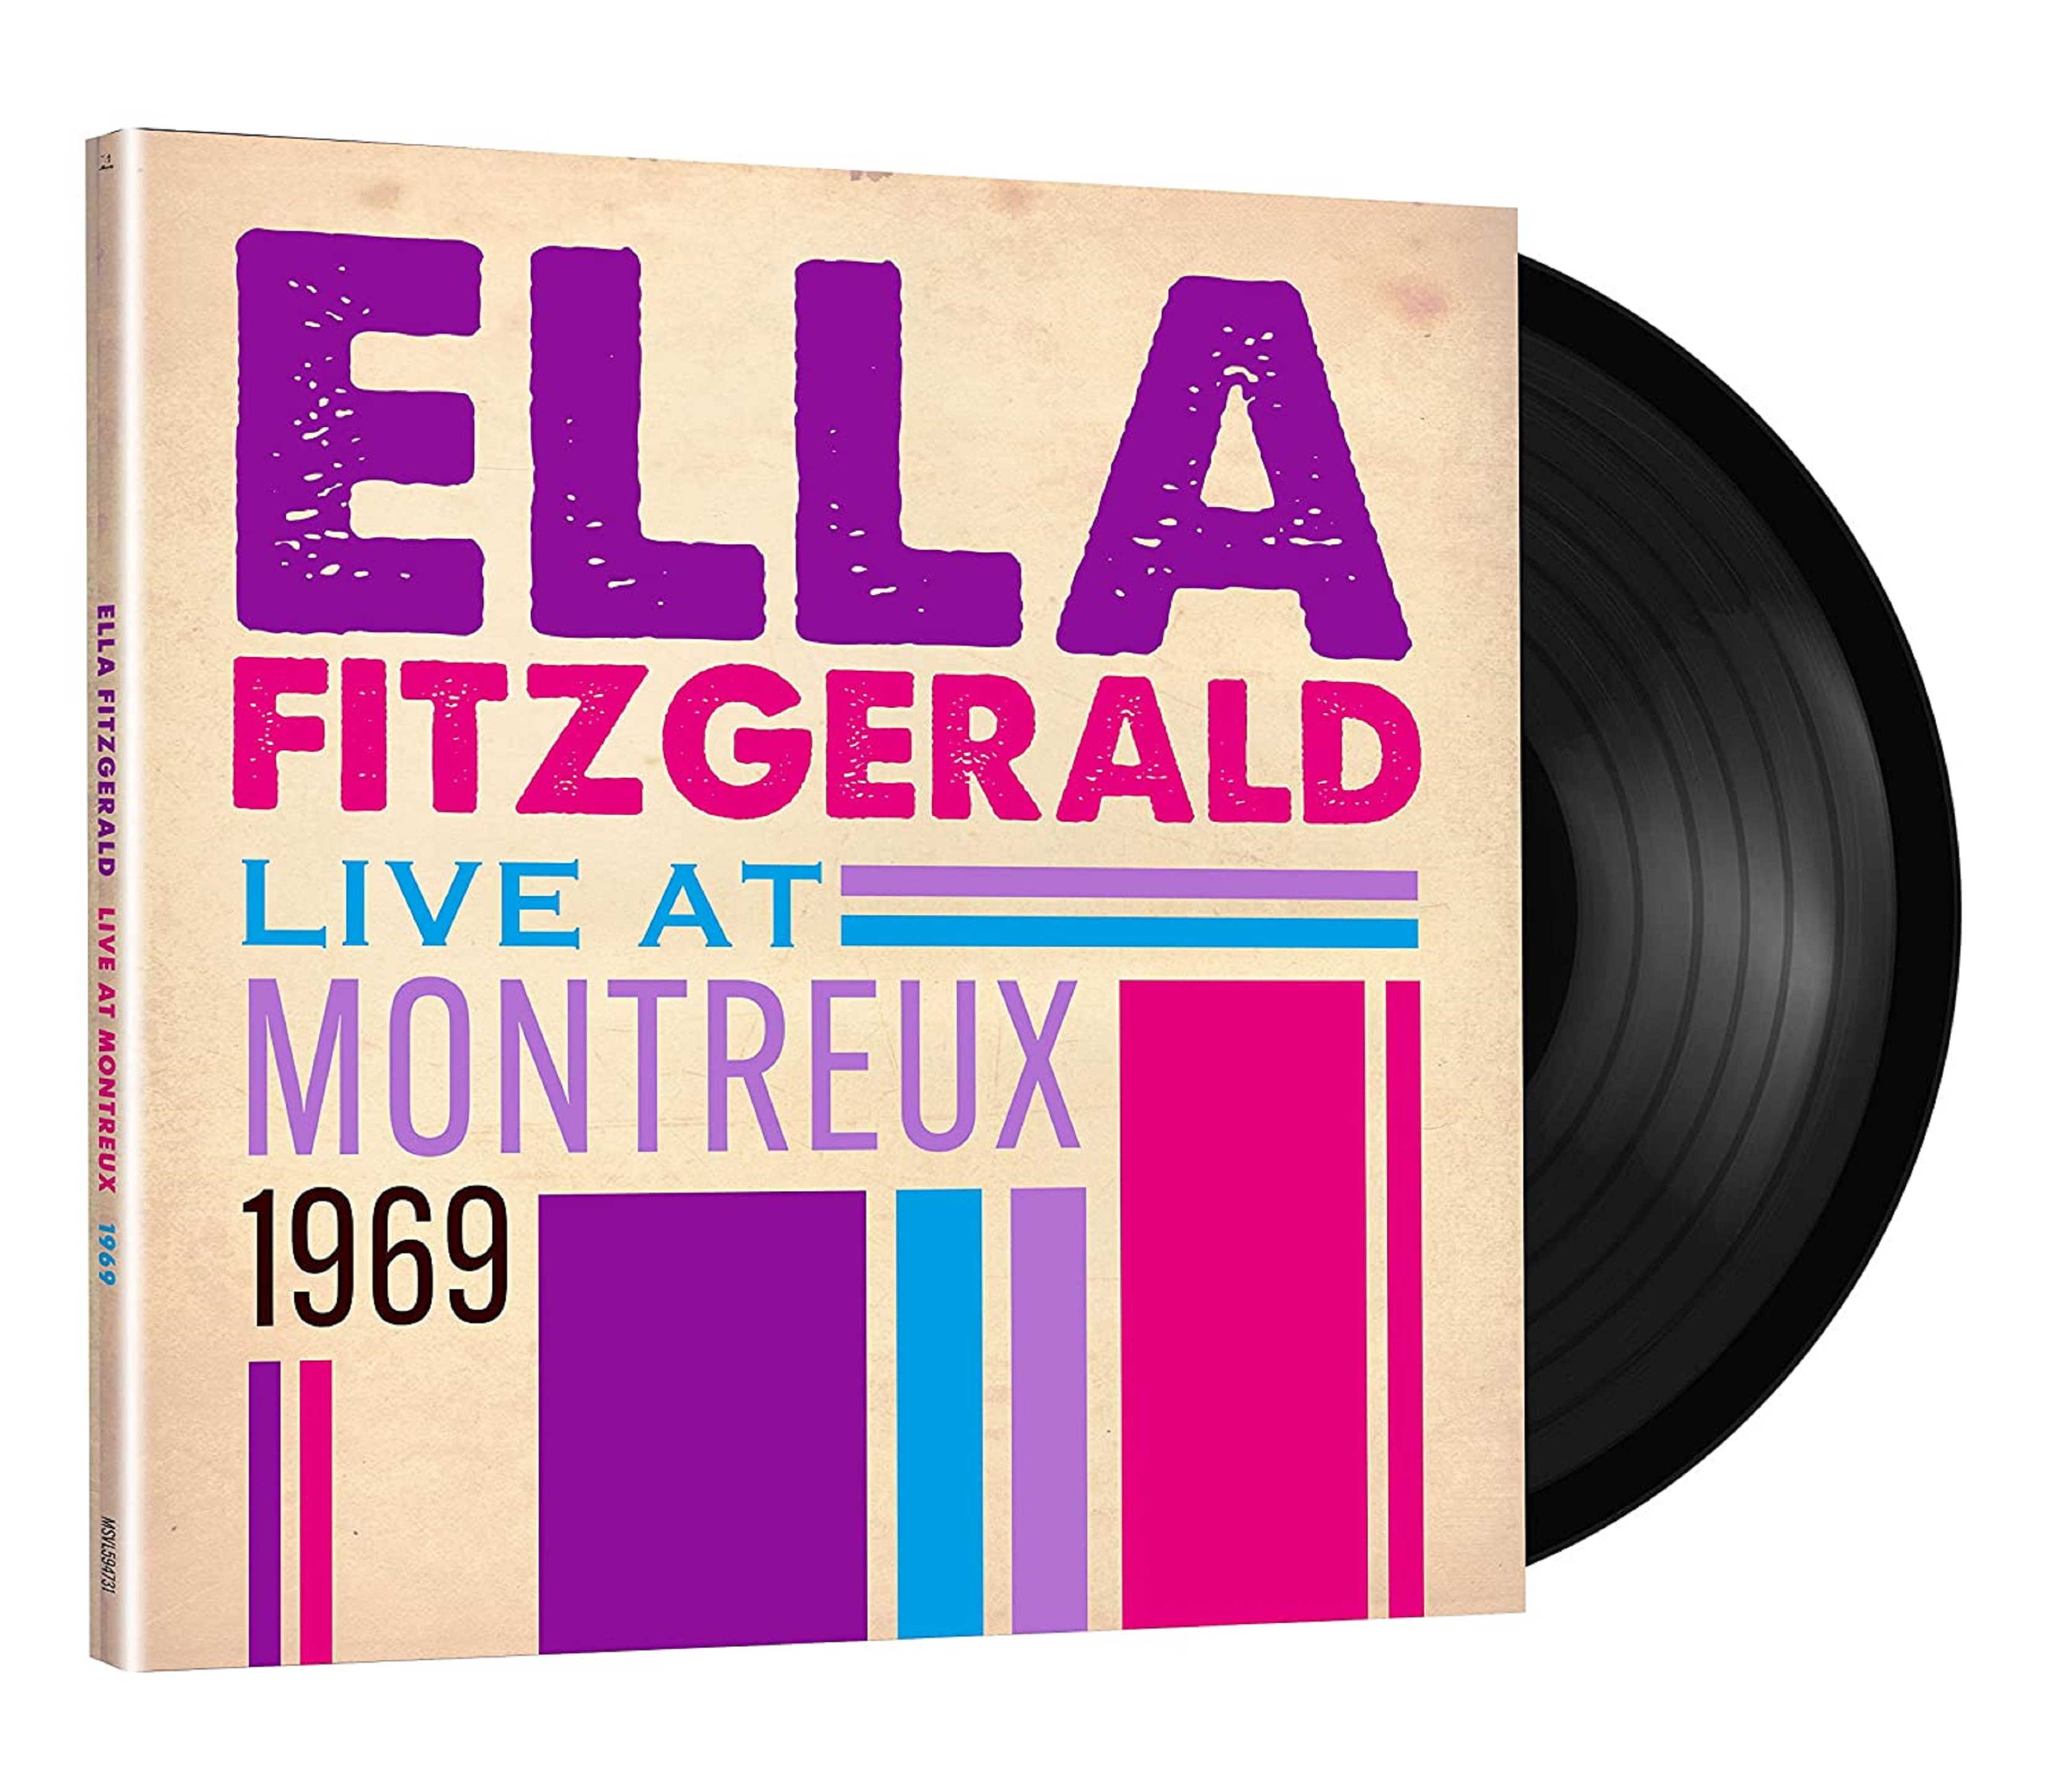 Ella Fitzgerald’s Legend Lives On as “First Lady of Song” in Live at Montreux 1969 Album Release